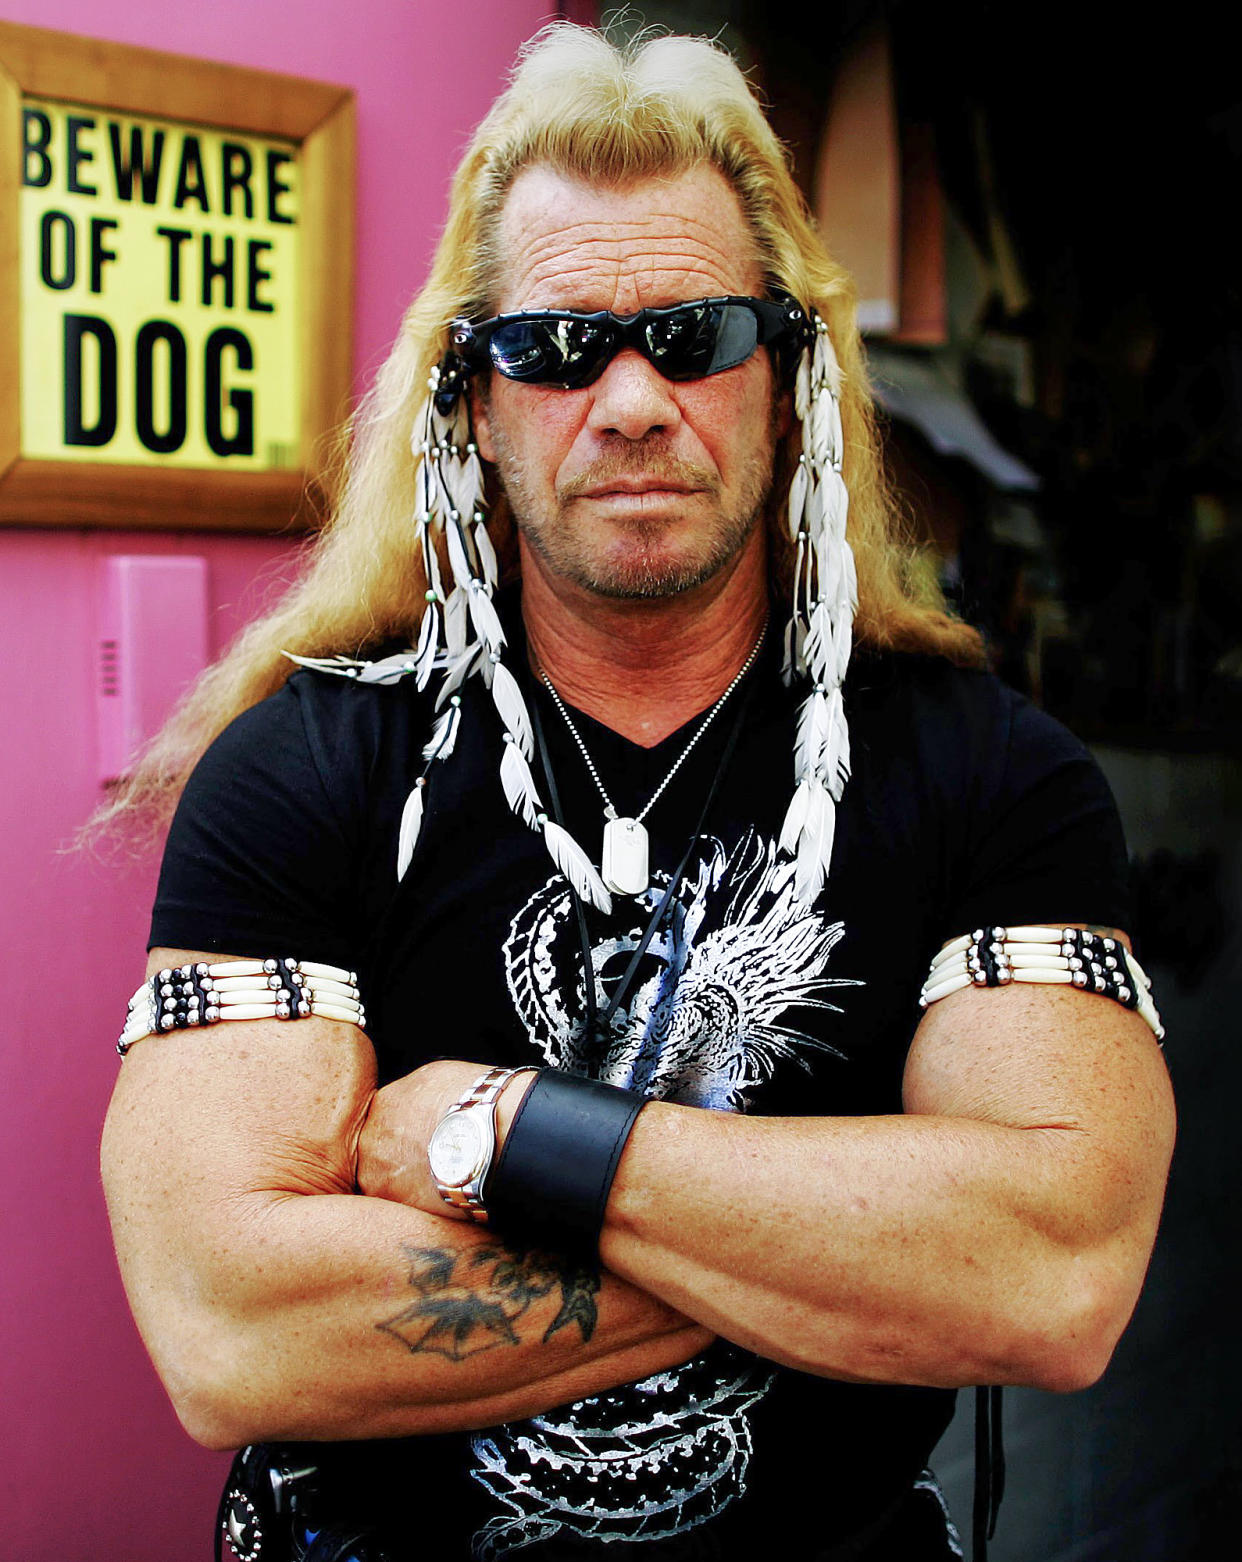 Dog the Bounty Hunter Reveals He Just Learned He Fathered a Secret Son Named Jon: ‘This Day Has a New Meaning’